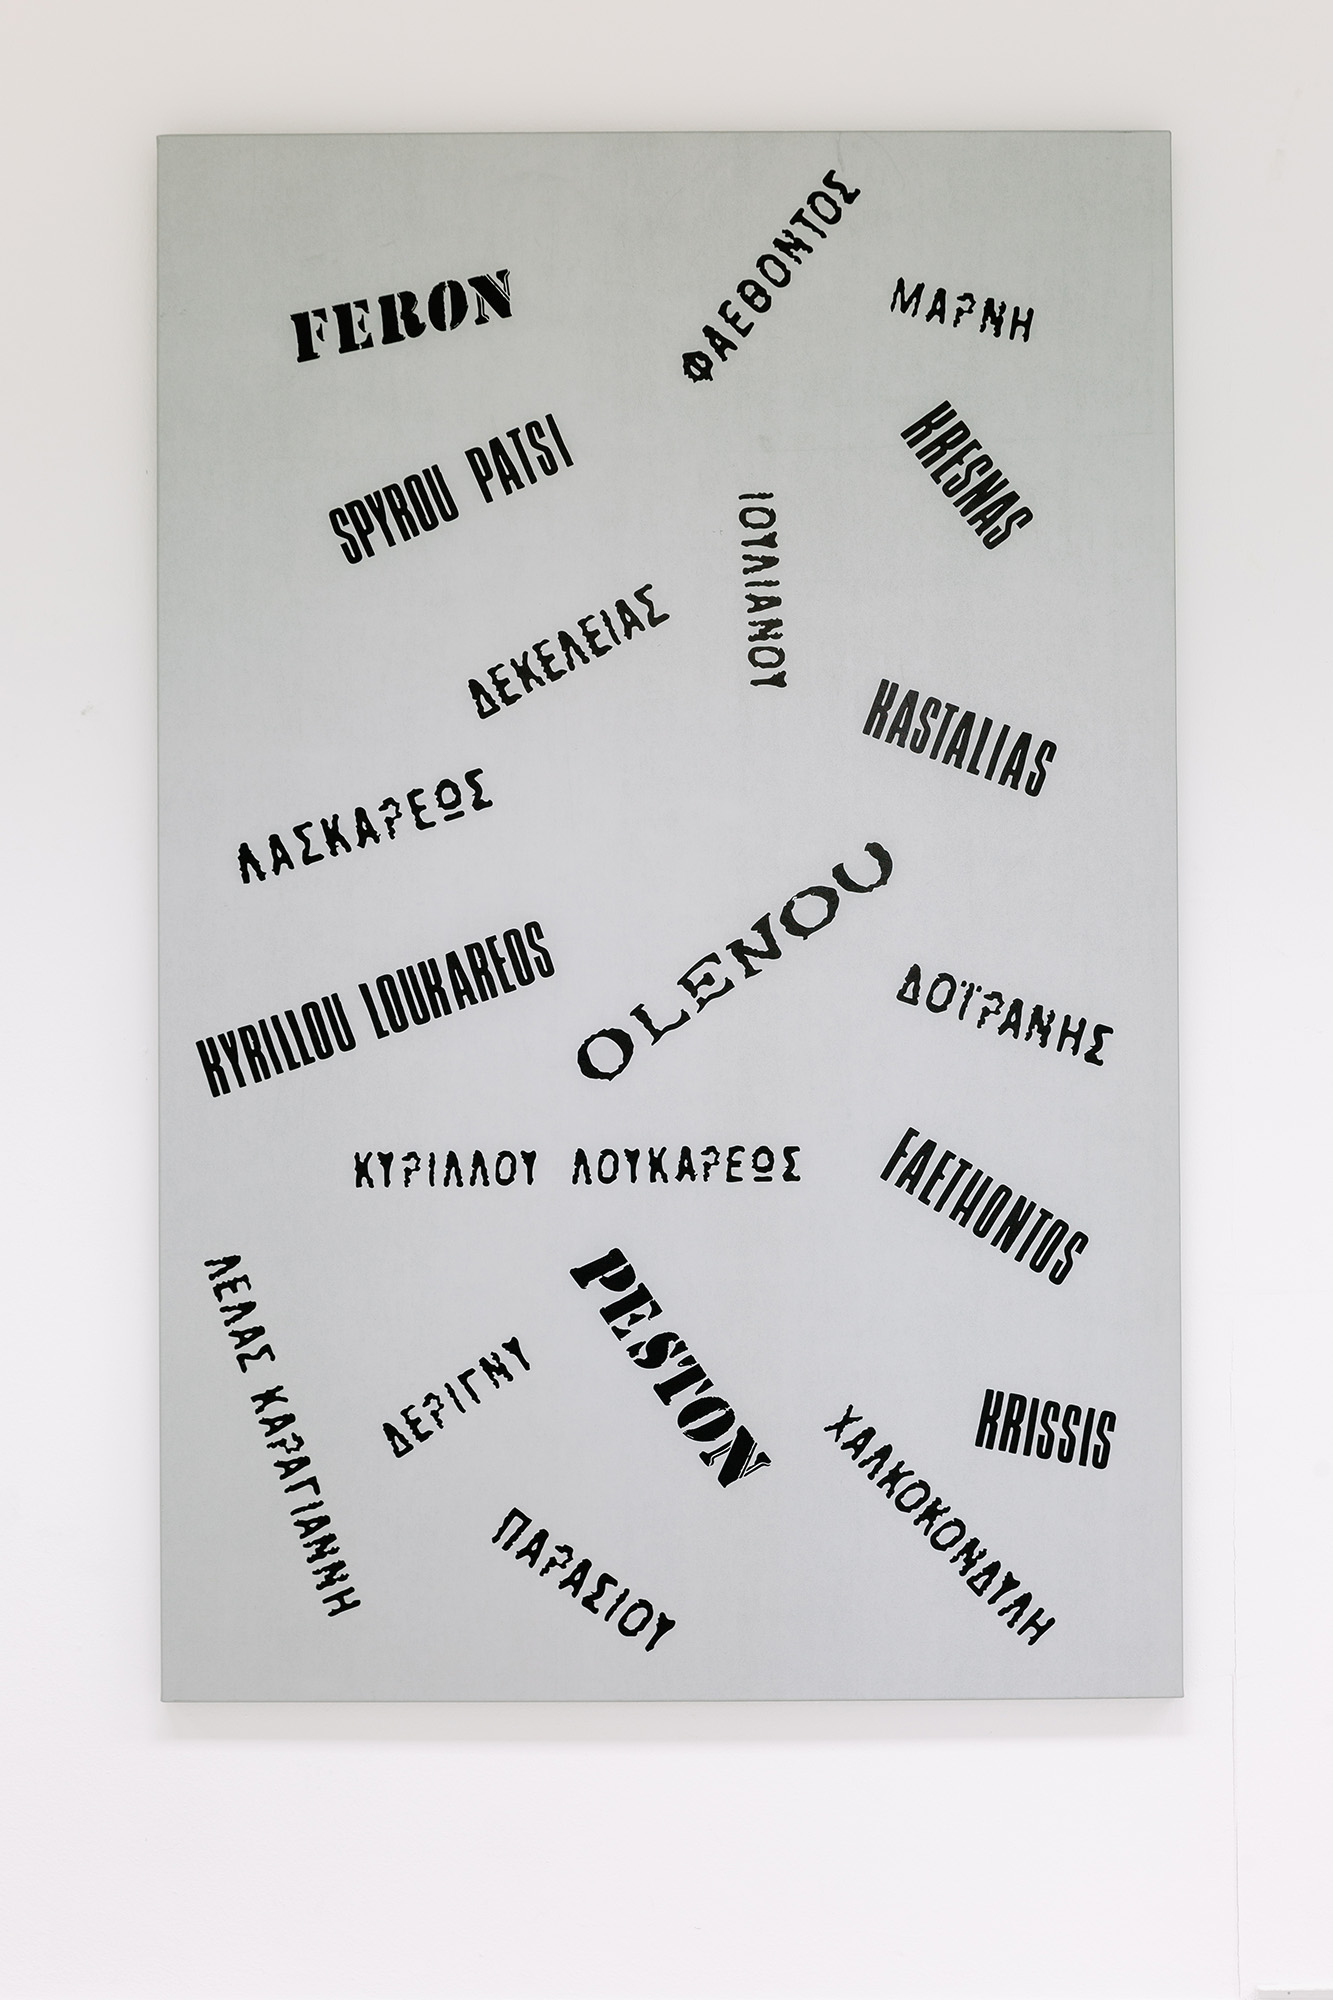 A screen-printed piece from the Greek artist Rallou Panagiotou featuring Athenian street names.